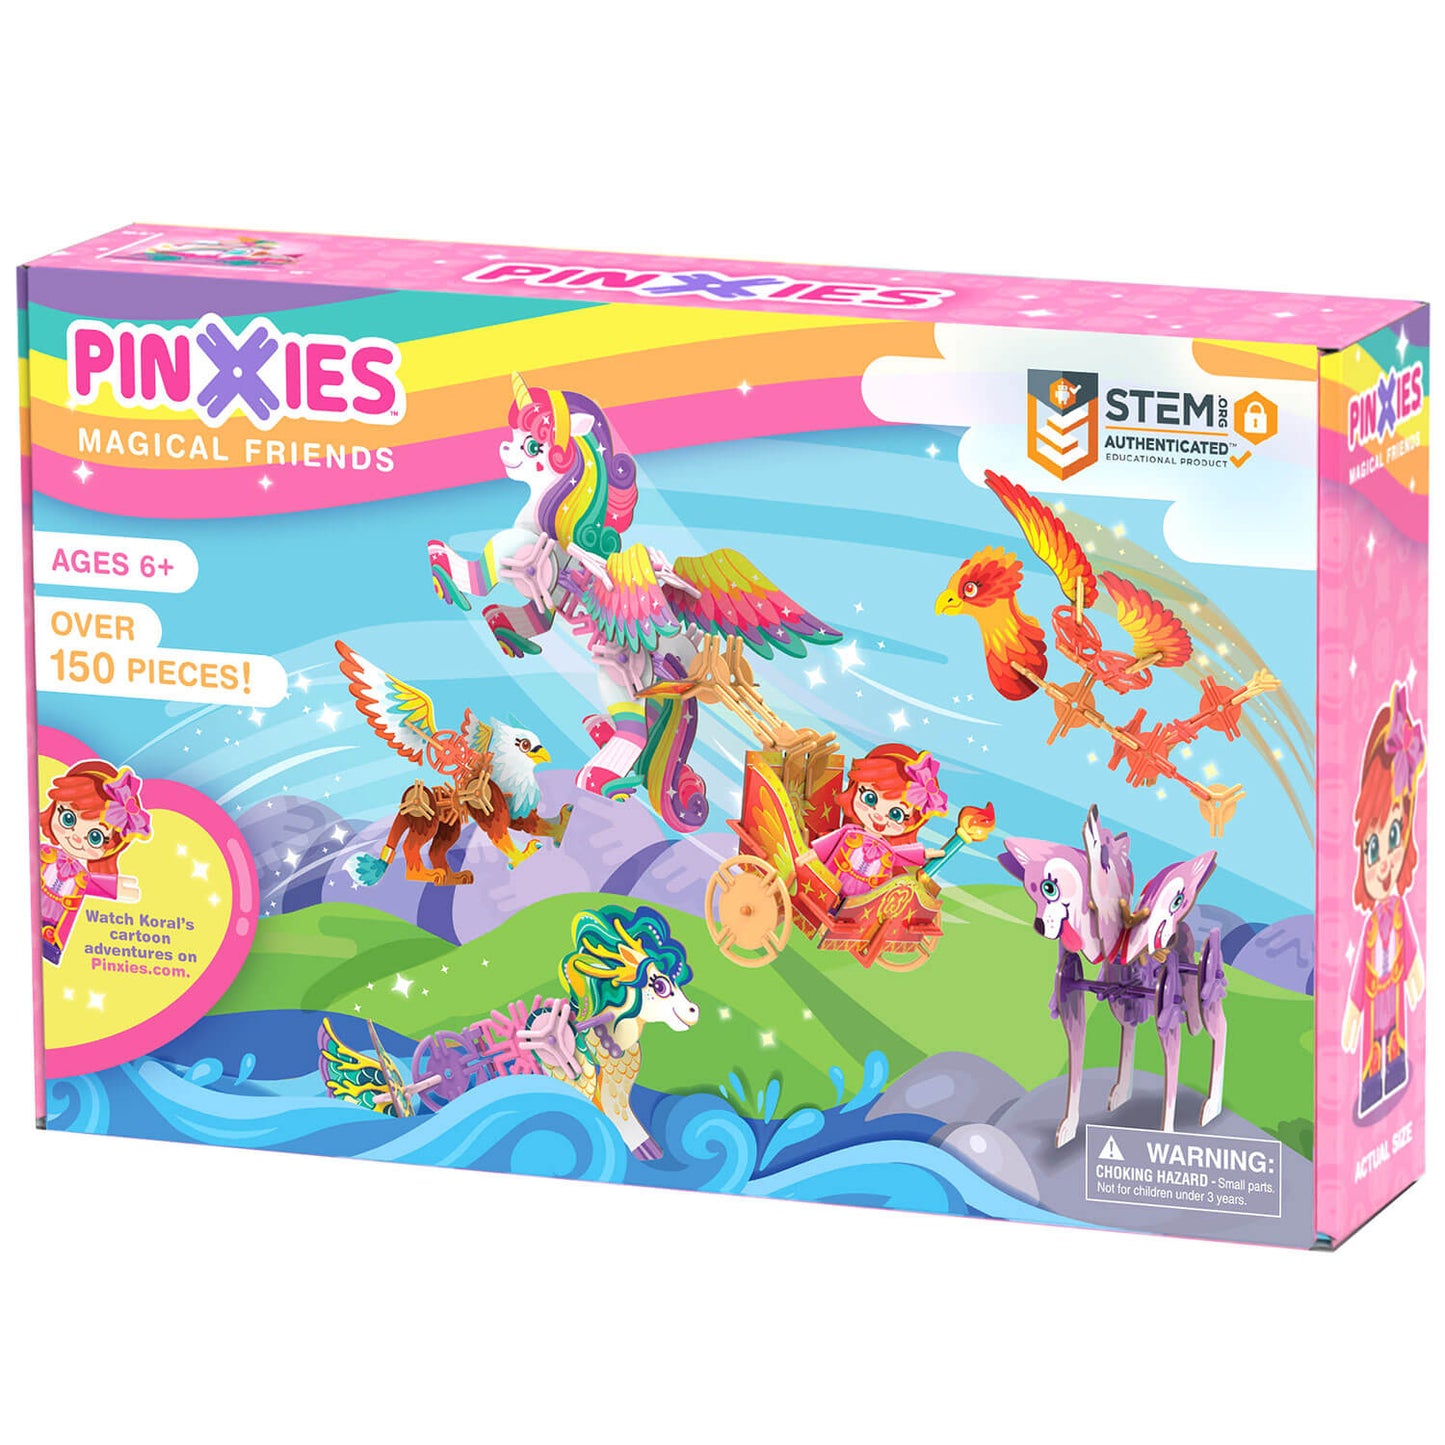 Pinxies Magical Friends is a STEM authenticated building set for ages 6+